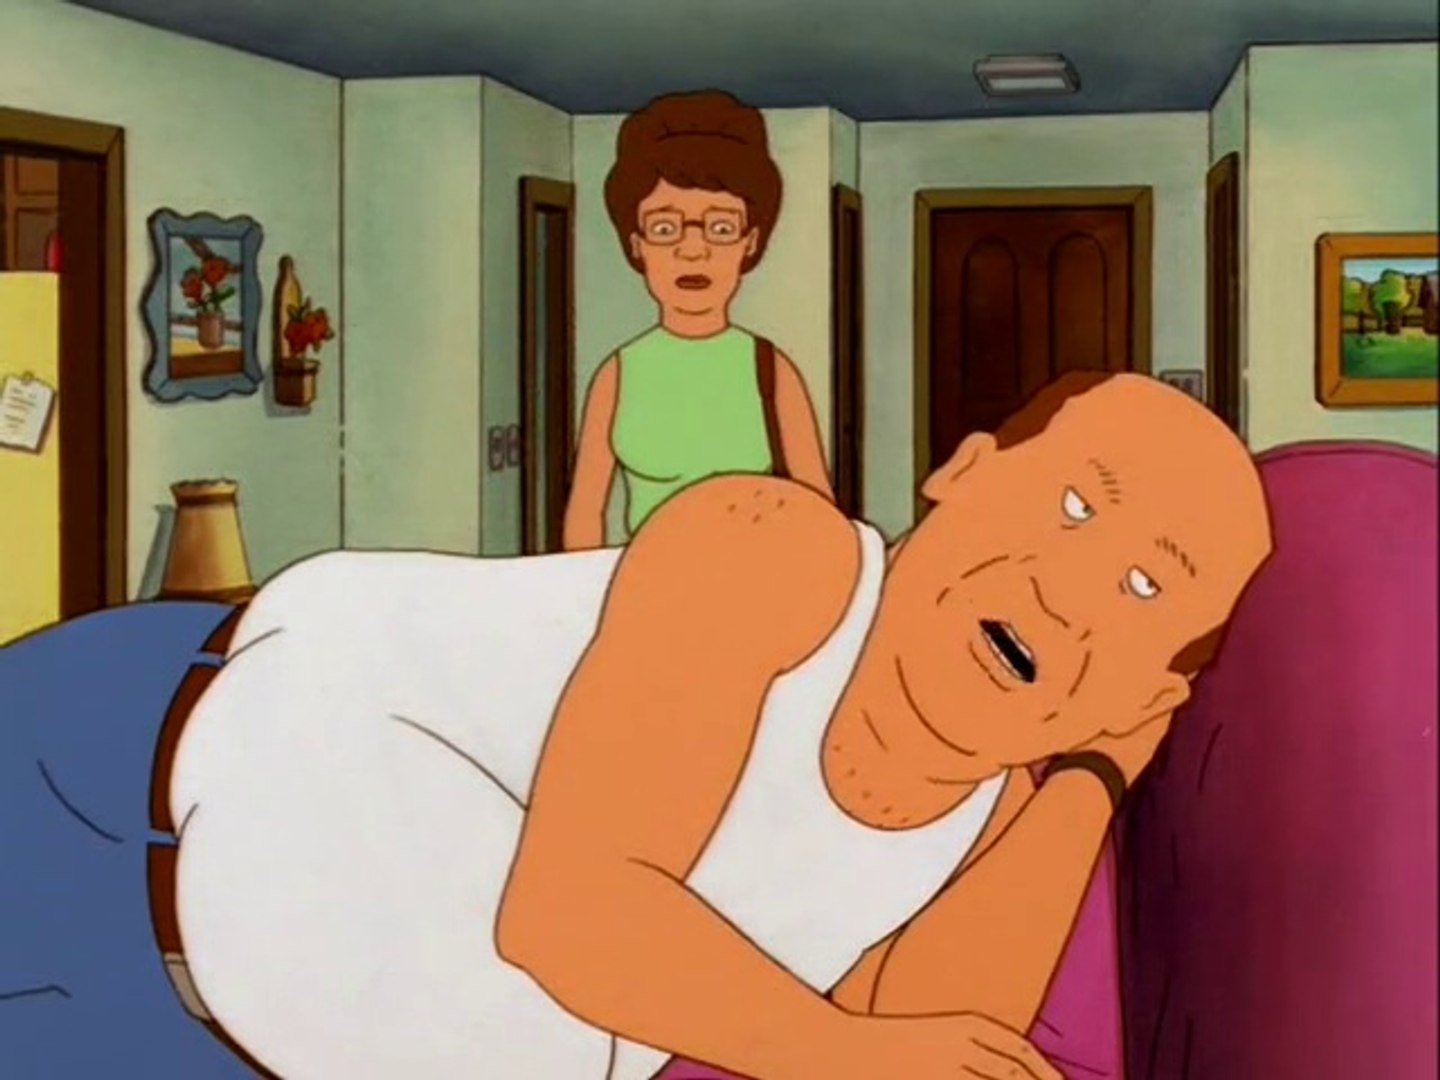 King of the Hill Season 2 by King of the Hill - Dailymotion